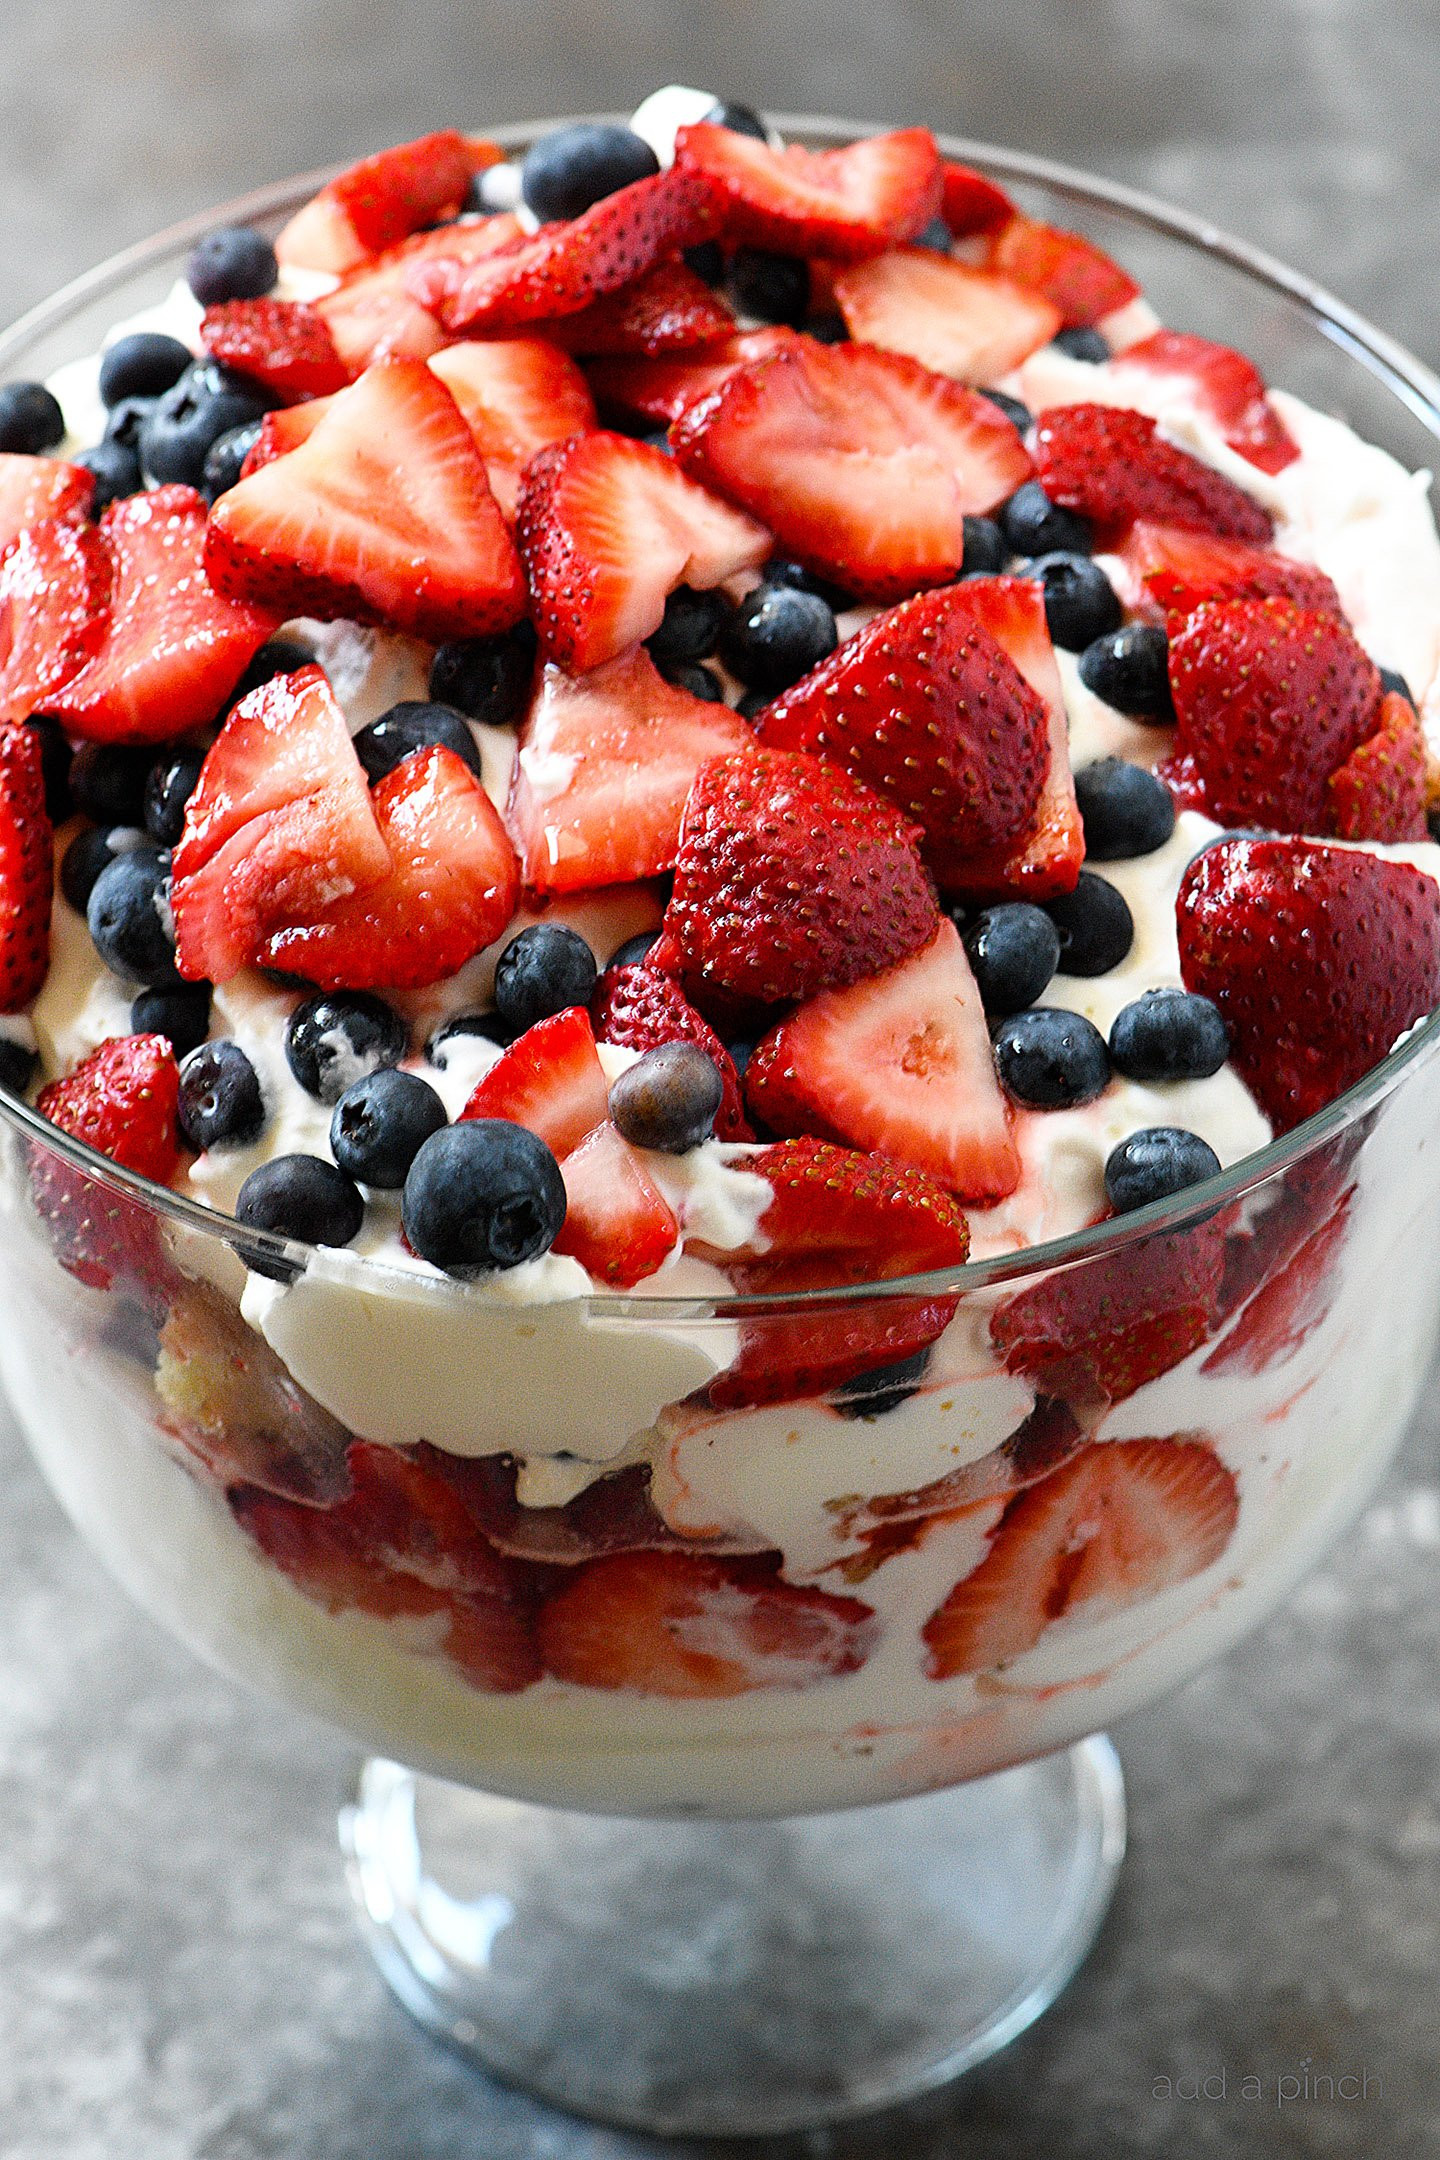 The 30 Best Ideas for Trifle Dessert Recipes - Best Recipes Ideas and ...